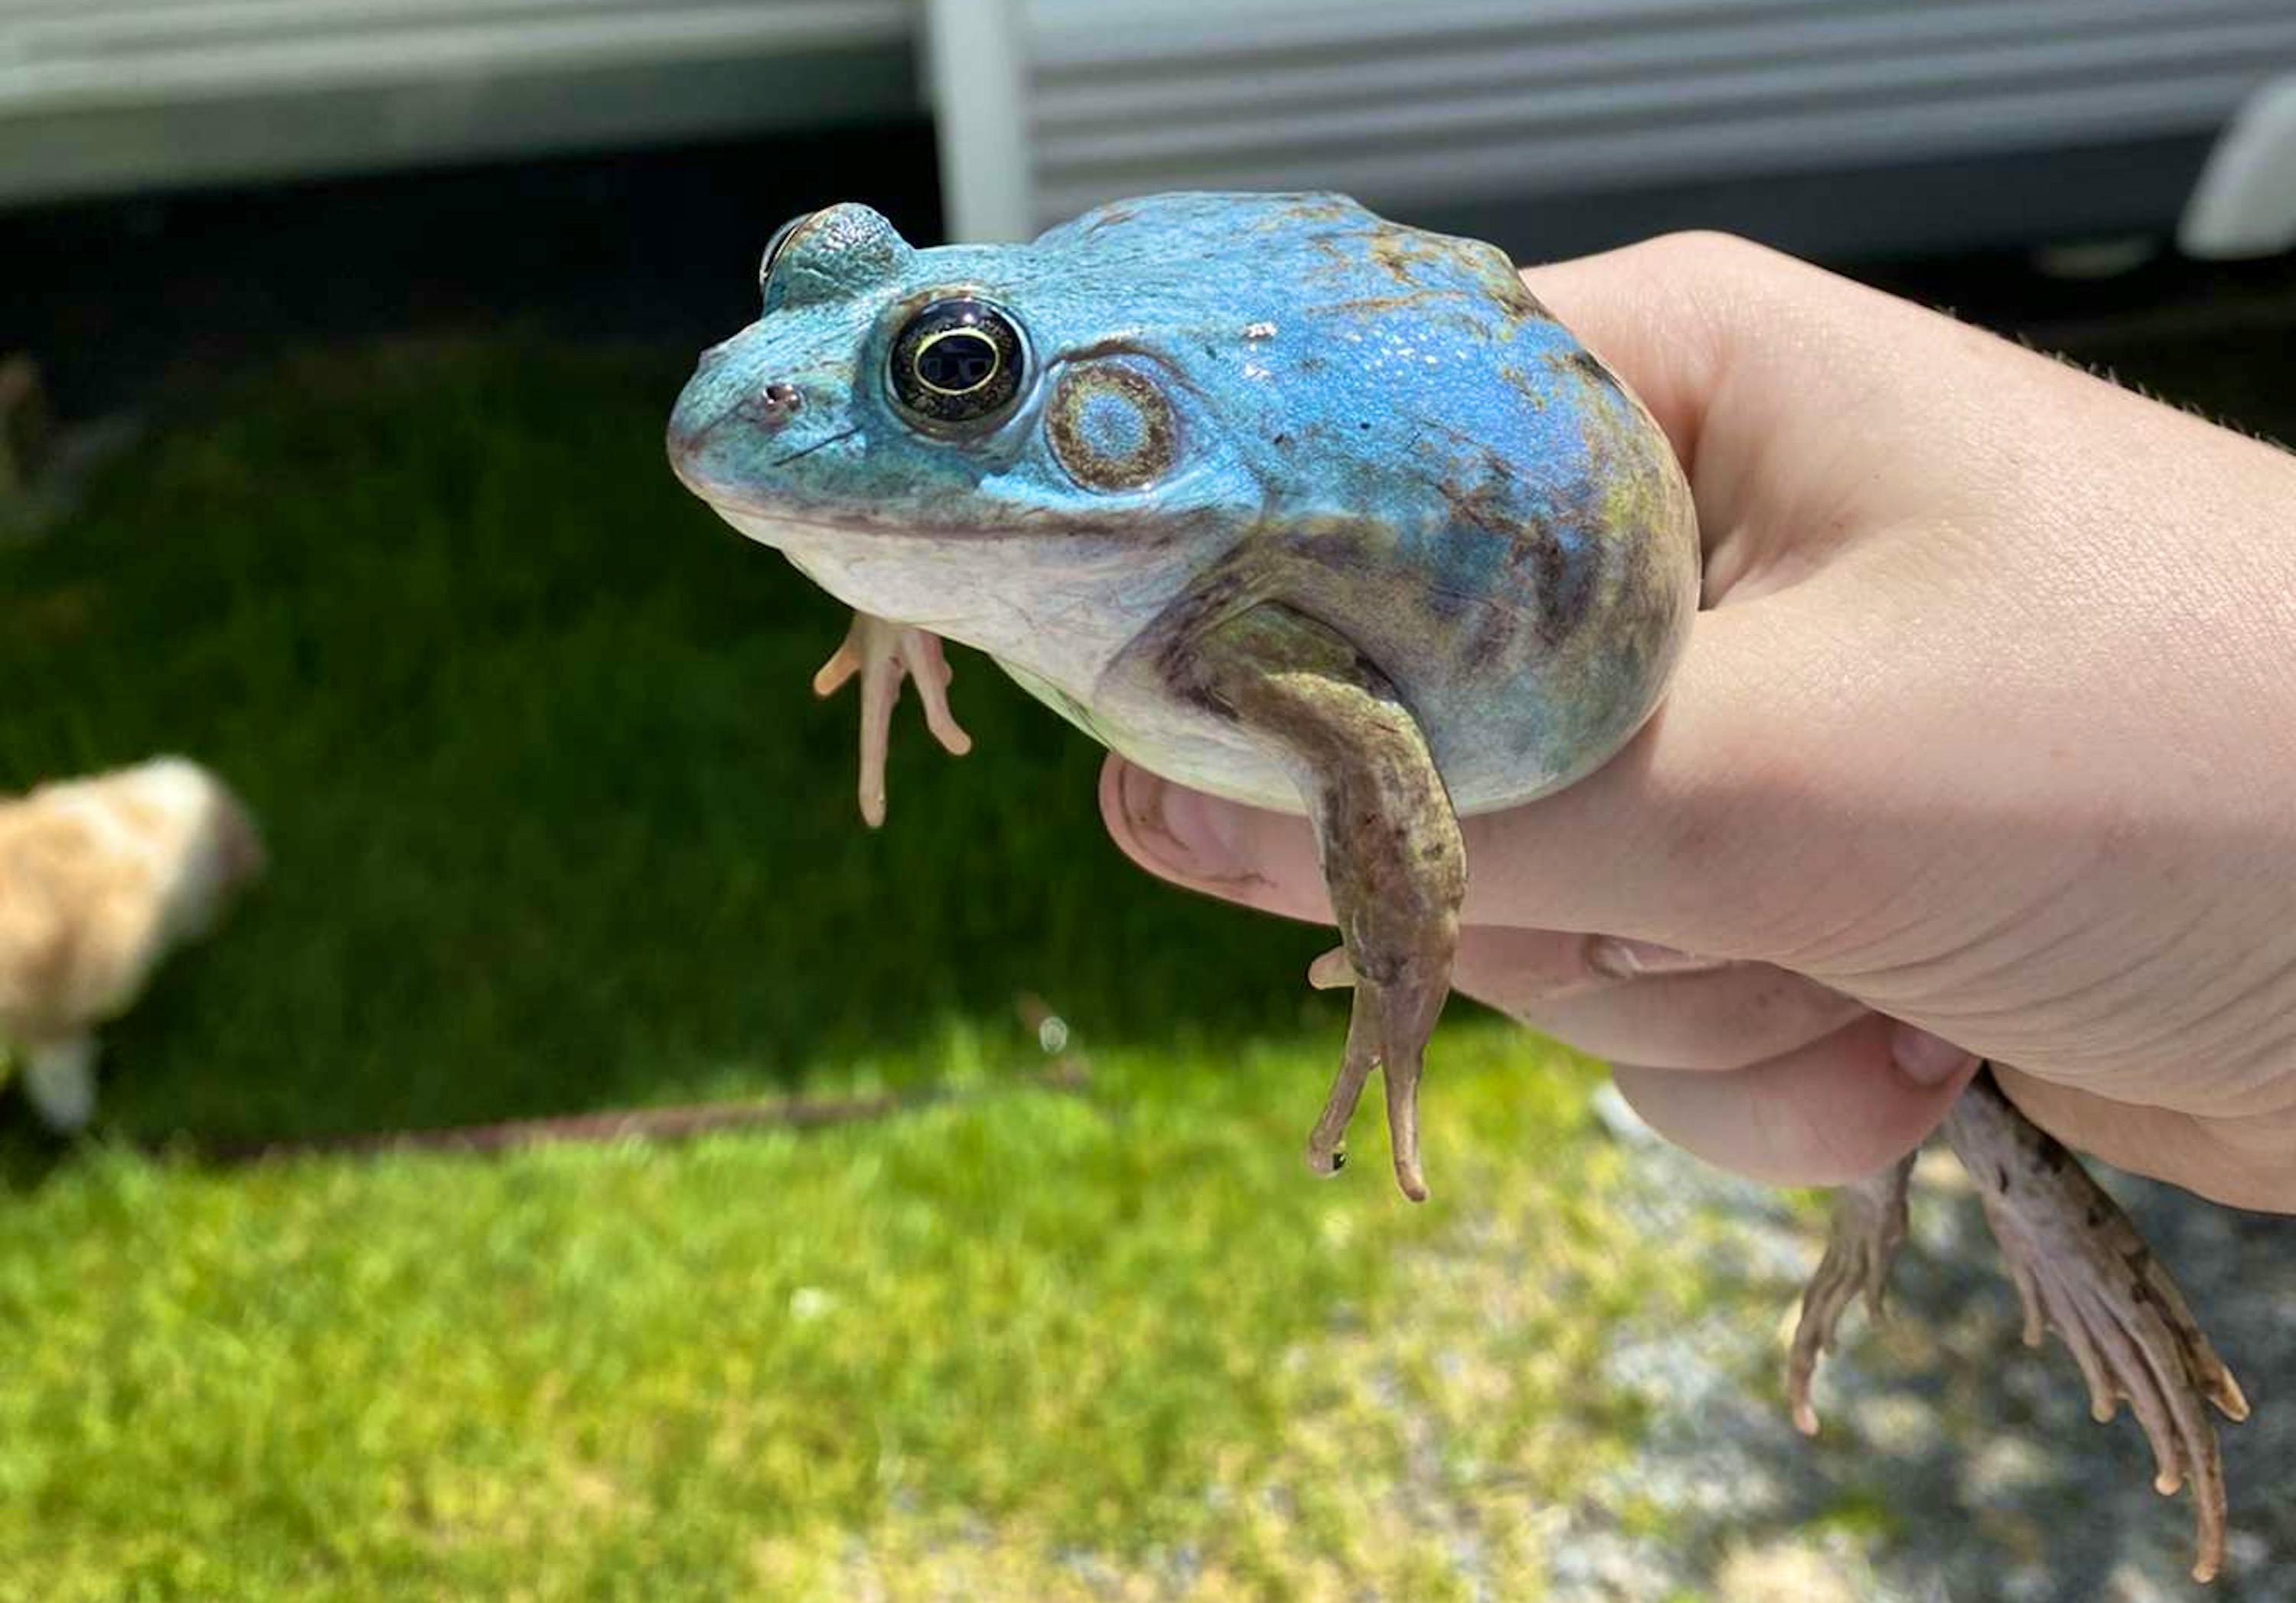 How can a green frog be blue?